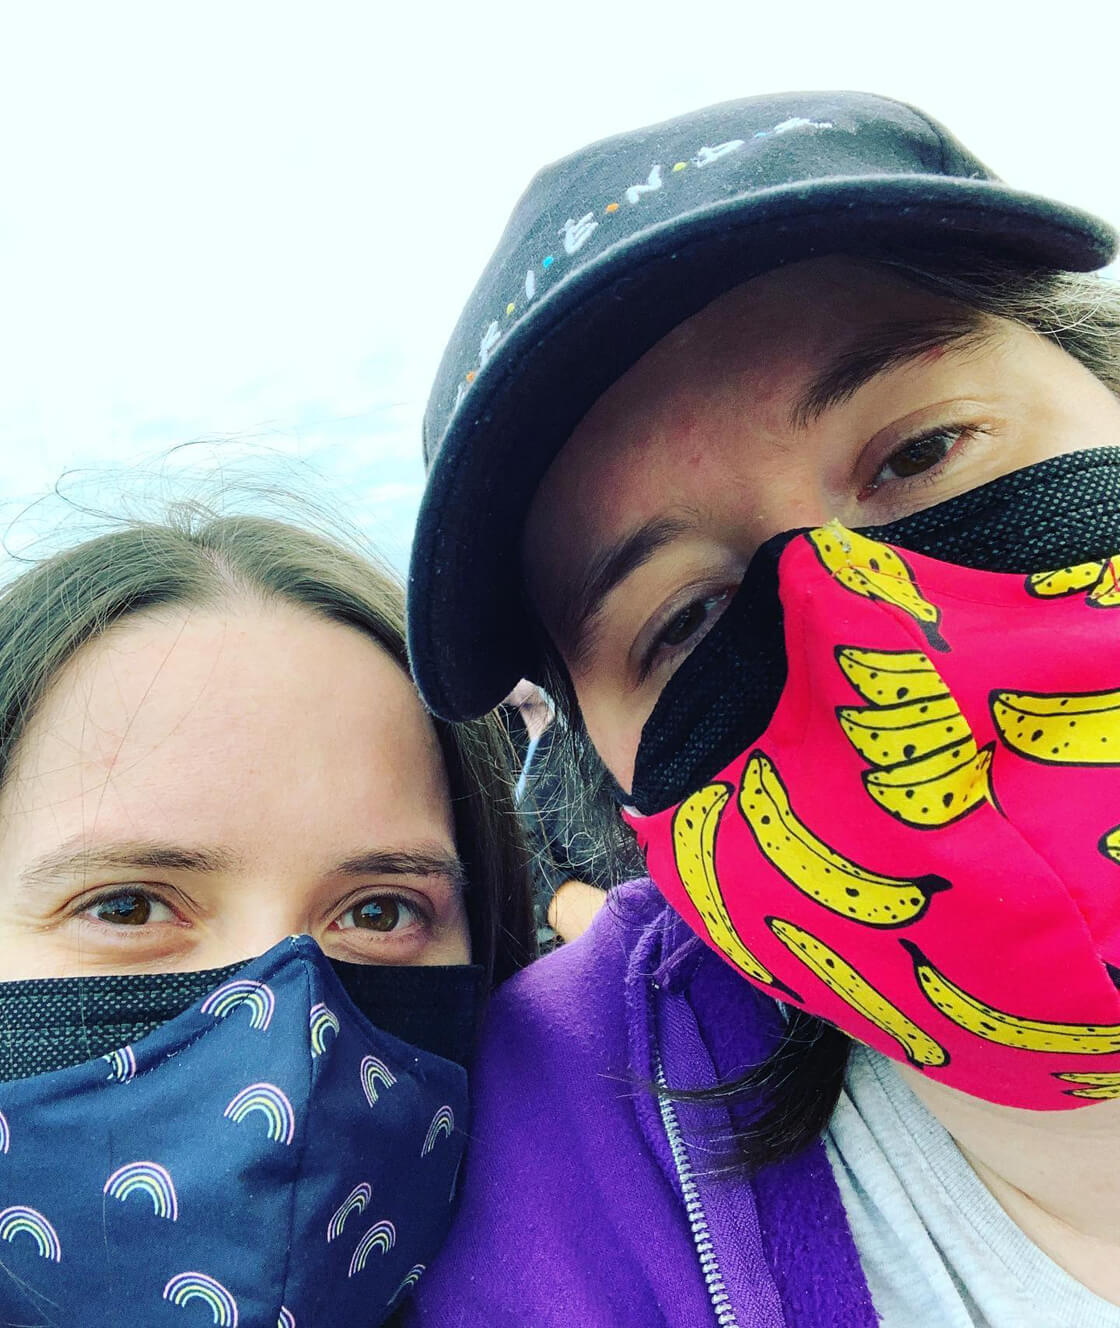 A selfie from the shoulders up of Sarah and karine. They are both wearing face coverings. Karine is wearing a black Friends hat.